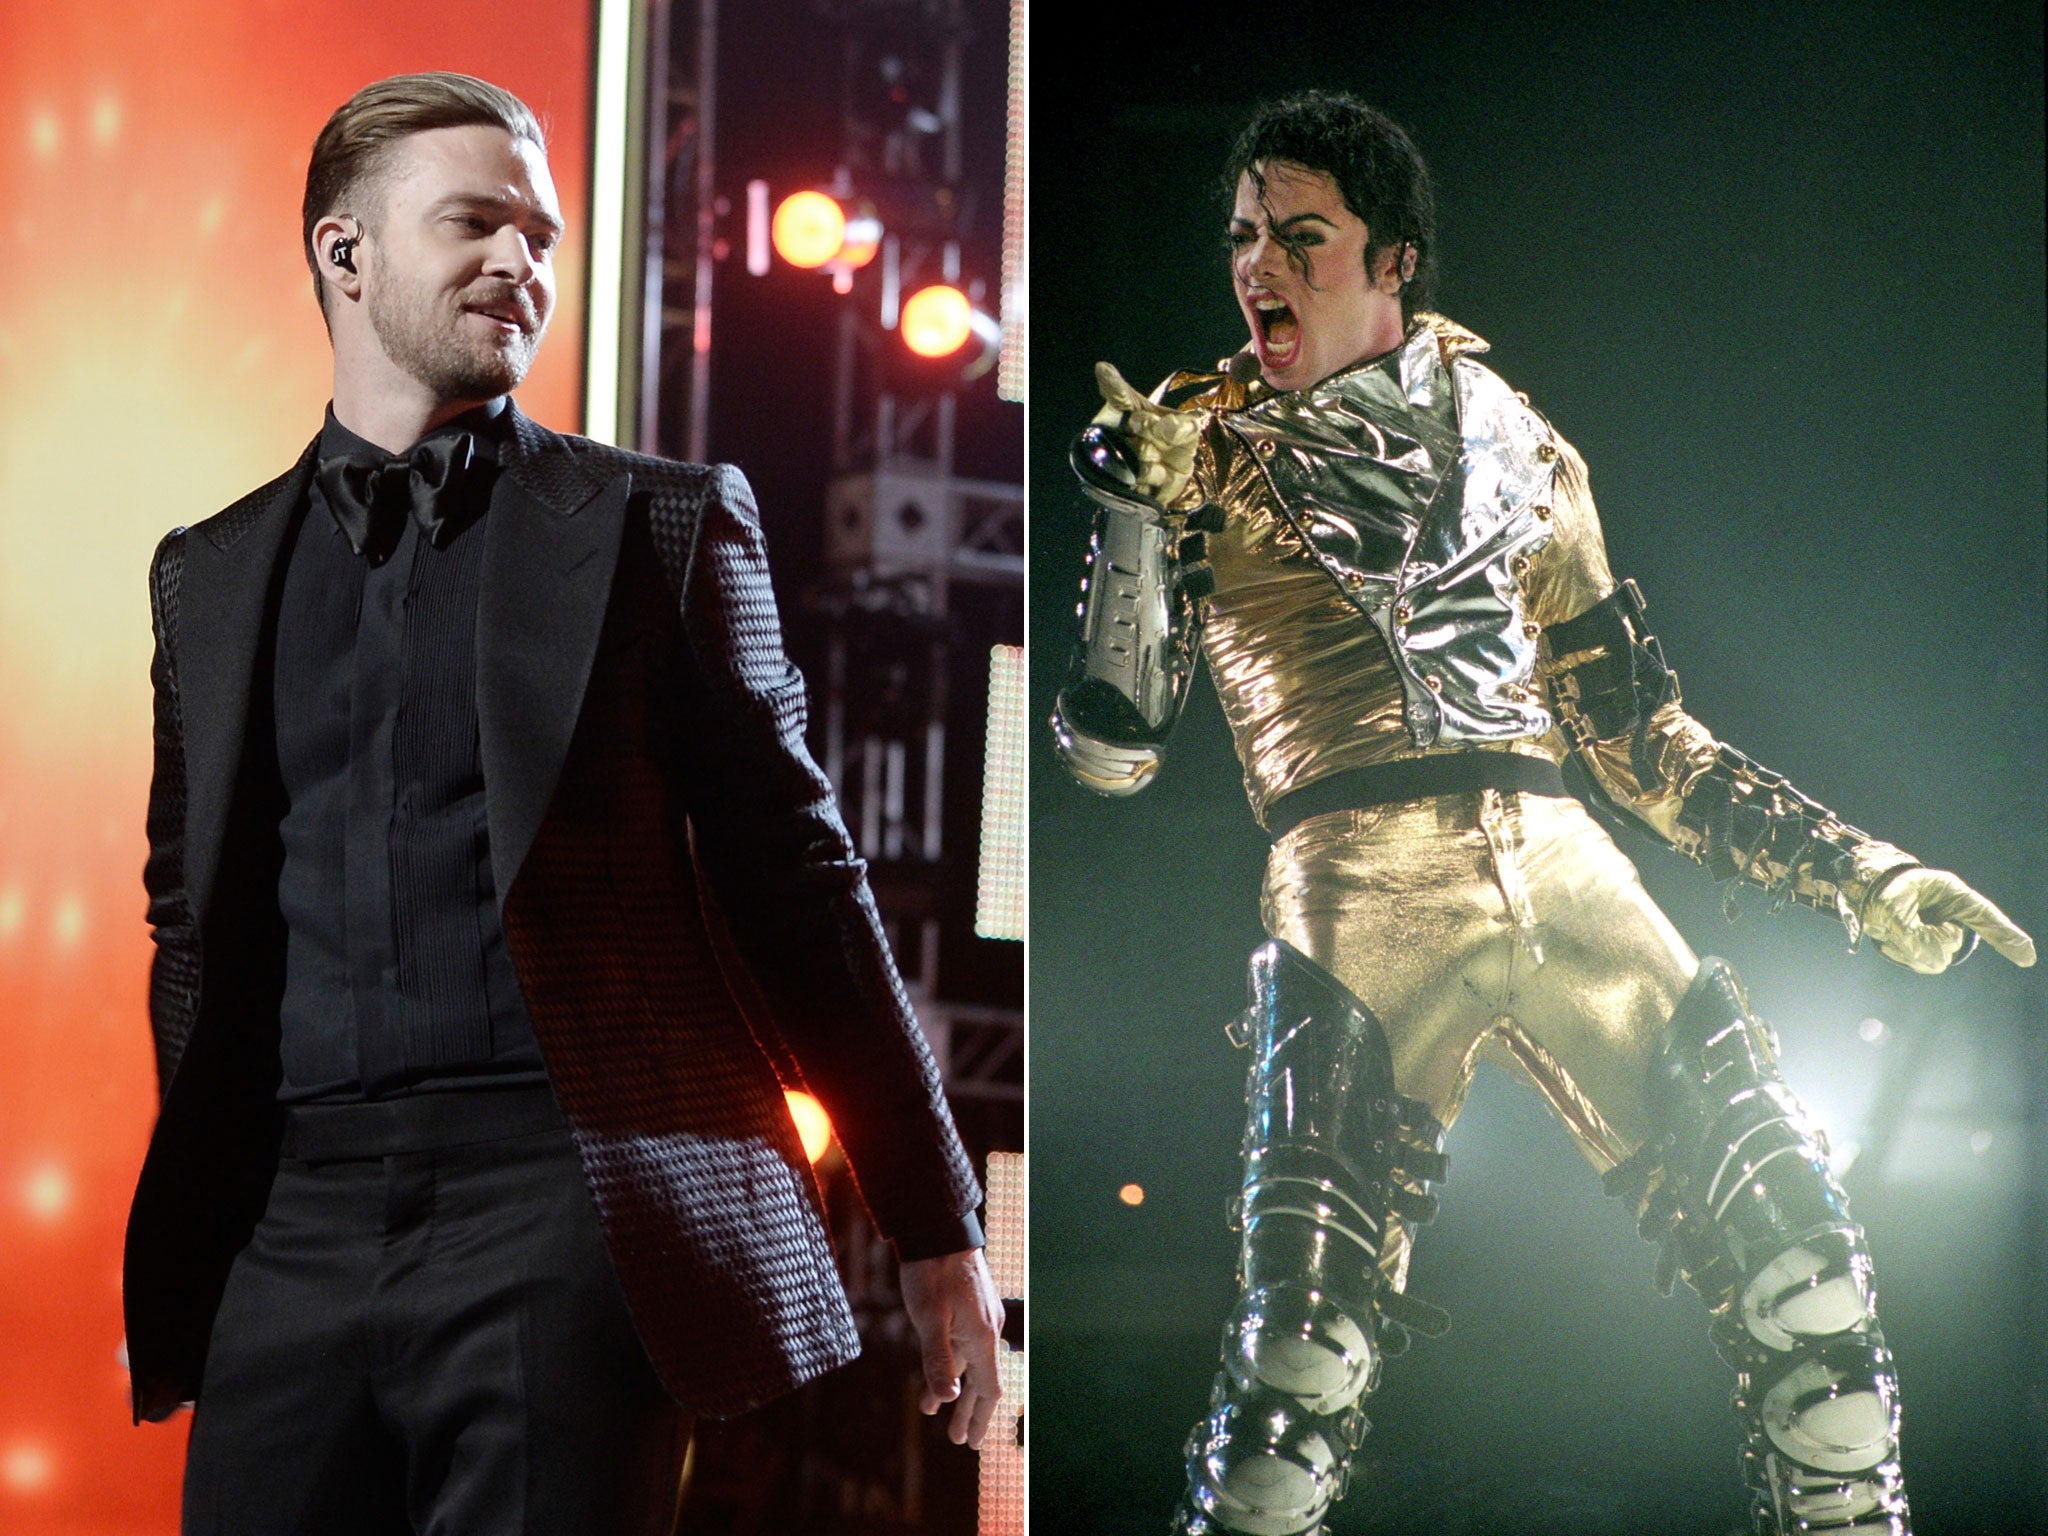 'Suit and Tie' singer Justin Timberlake can be heard on Michael Jackson's 'Love Never Felt So Good'